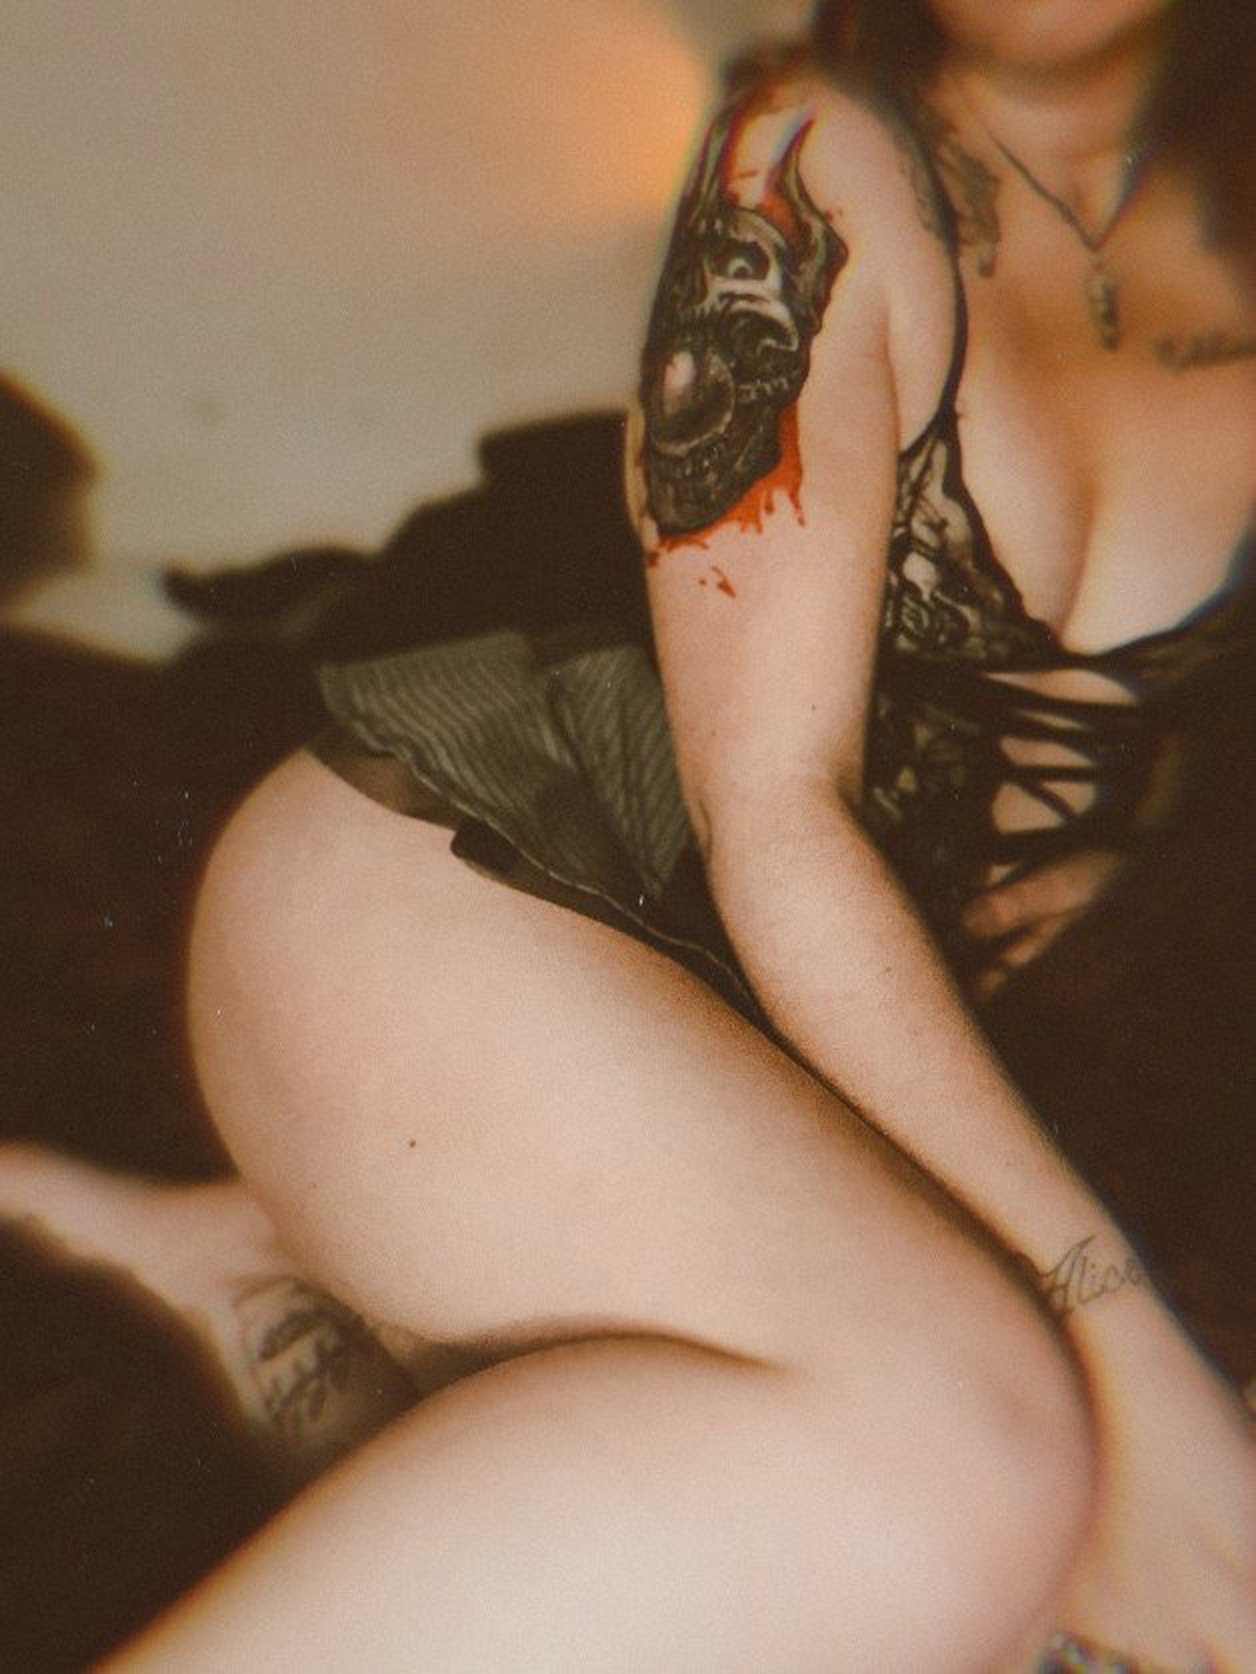 Photo by Spooky666babe with the username @Spooky666babe, who is a star user,  March 27, 2023 at 8:06 AM and the text says '#horny #petite #brat #tattooed #smalltitties #alternative #goth #lingerie #fuckme #daddyhttps://onlyfans.com/u316082696'